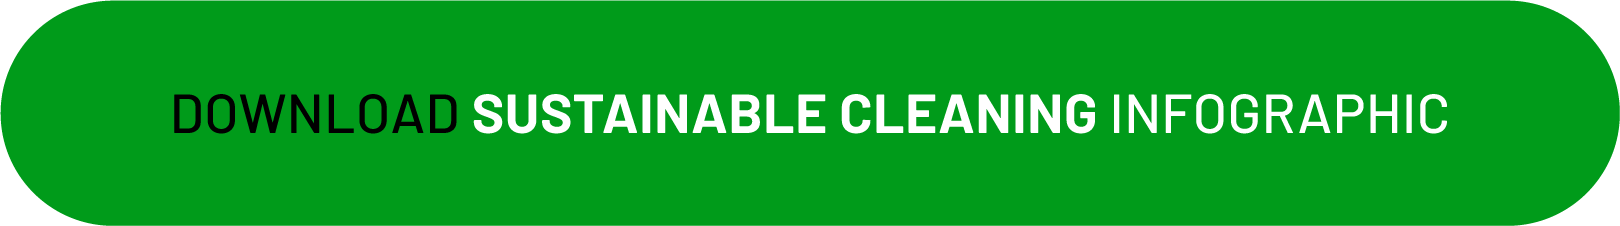 download infographic on sustainable house cleaning